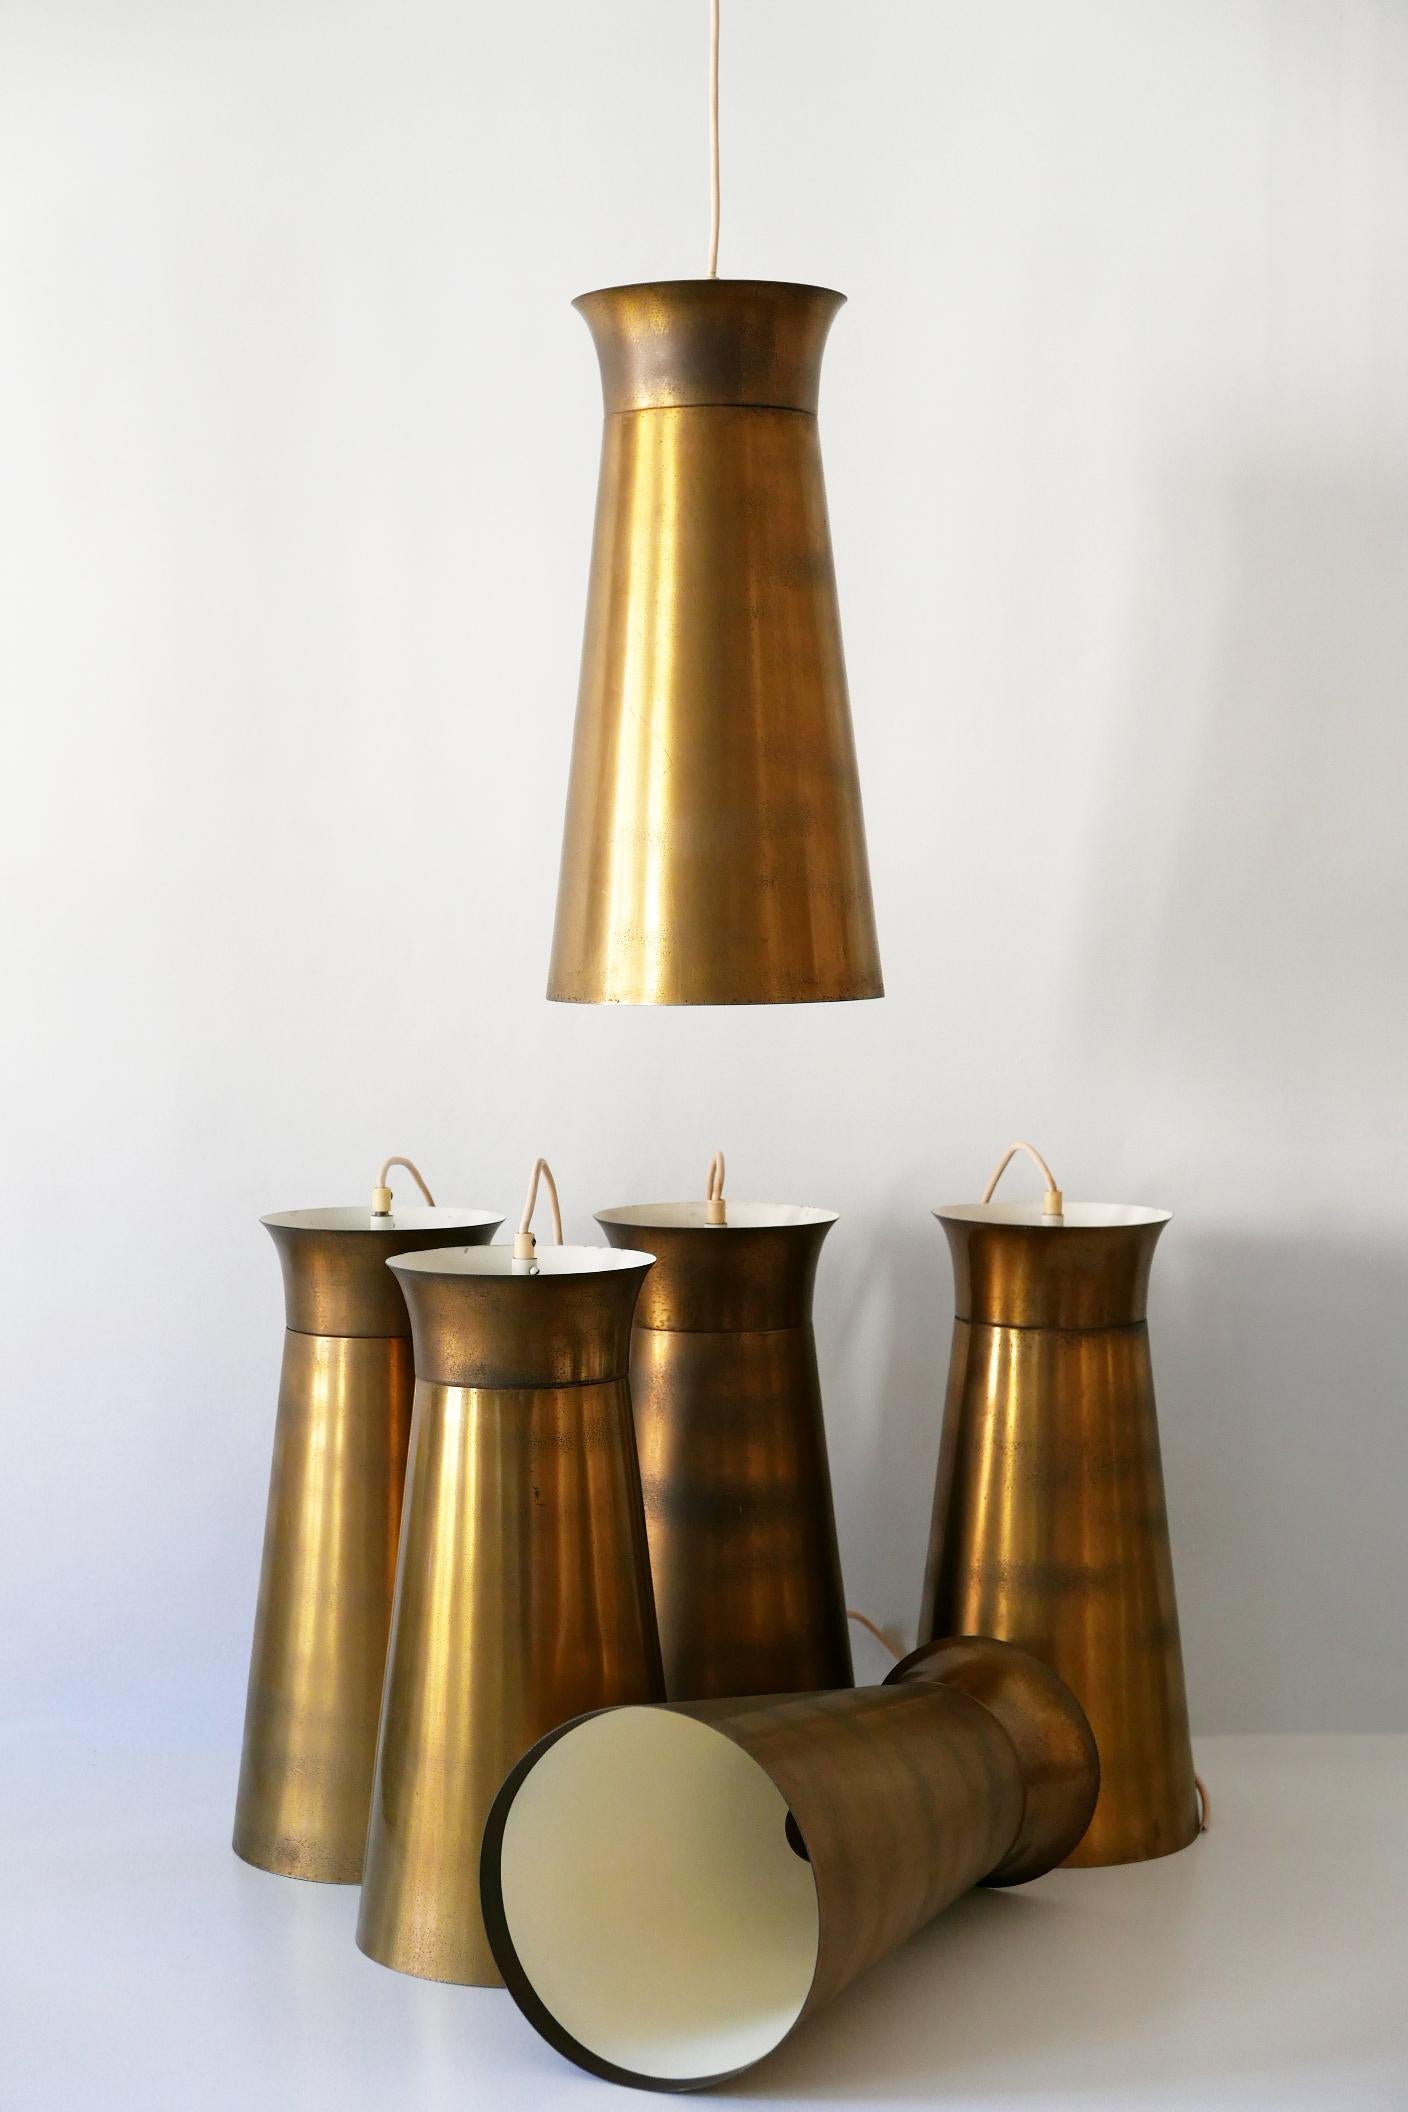 Elegant Mid-Century Modern Brass Pendant Lamps or Hanging Lights, 1950s, Germany For Sale 3